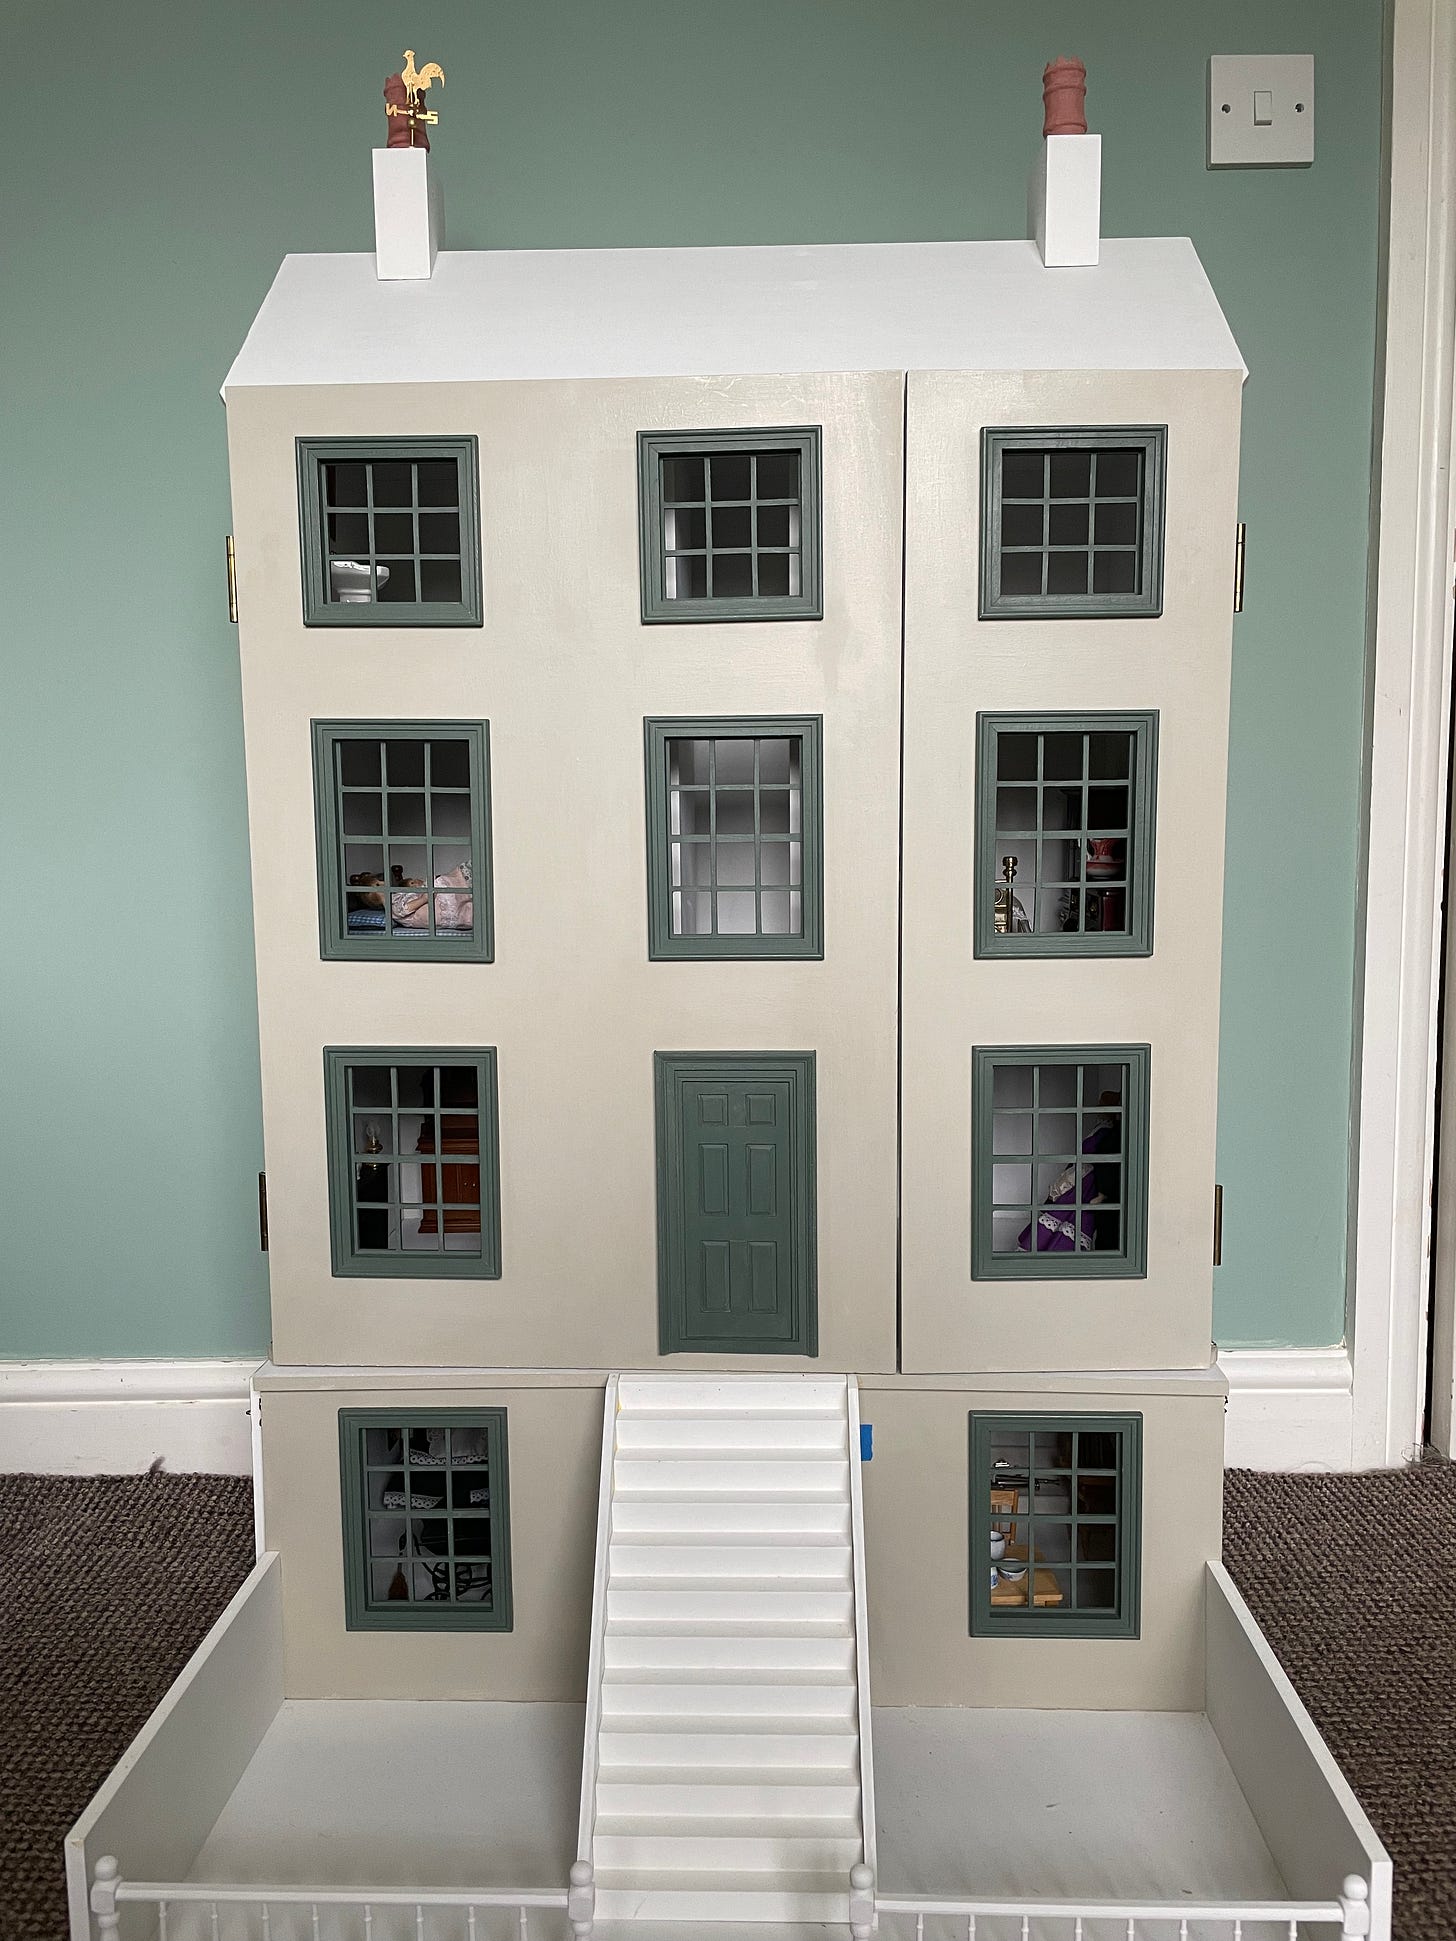 A doll's house in progress. It has a central front door, ten windows, steps up to the front door and a courtyard garden at the front. The walls and windows are painted in two different shades of green, but the roof, steps and garden are all as yet unpainted.